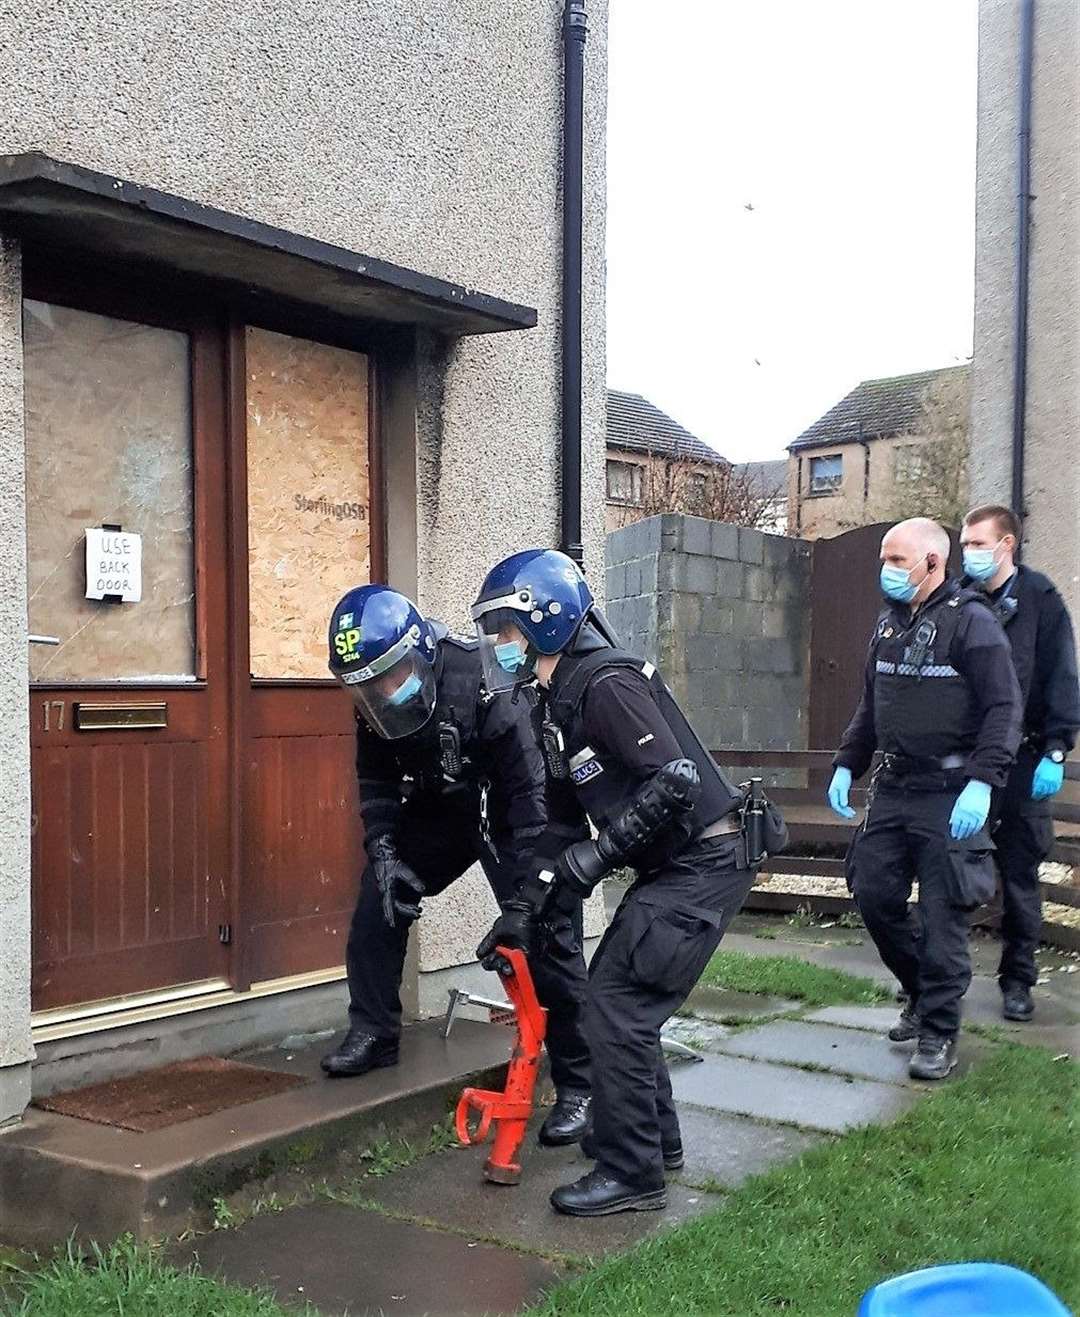 A special squad of officers approach the suspect's house in Thurso.